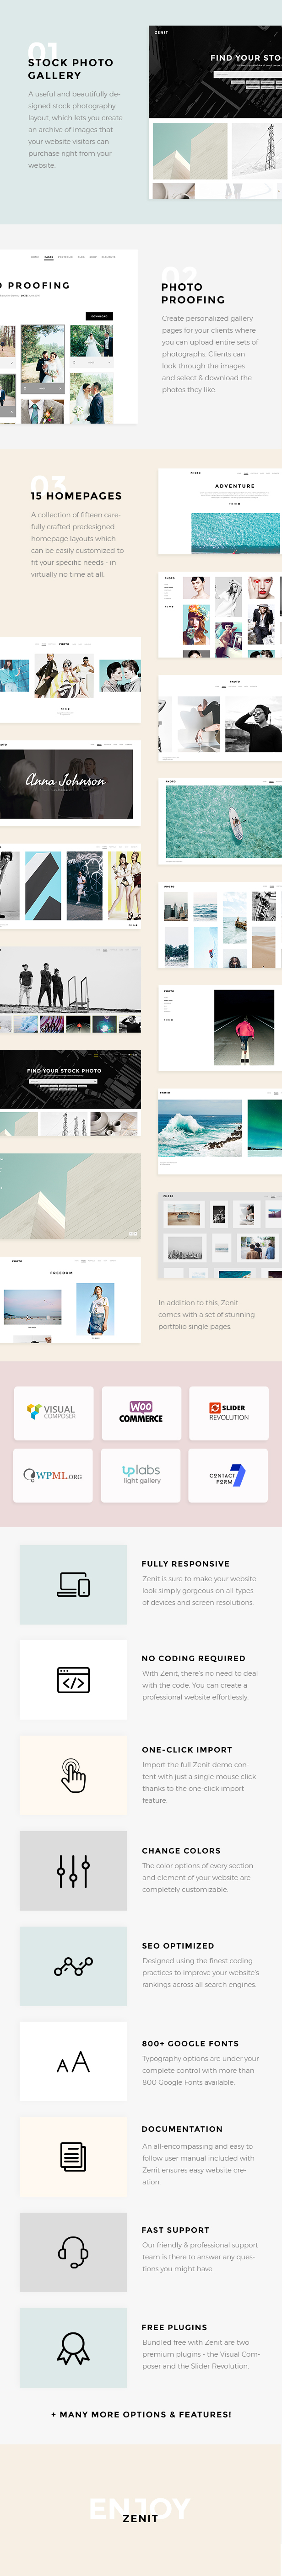 WordPress theme Zenit - A Crisp and Clean Photography Theme (Photography)